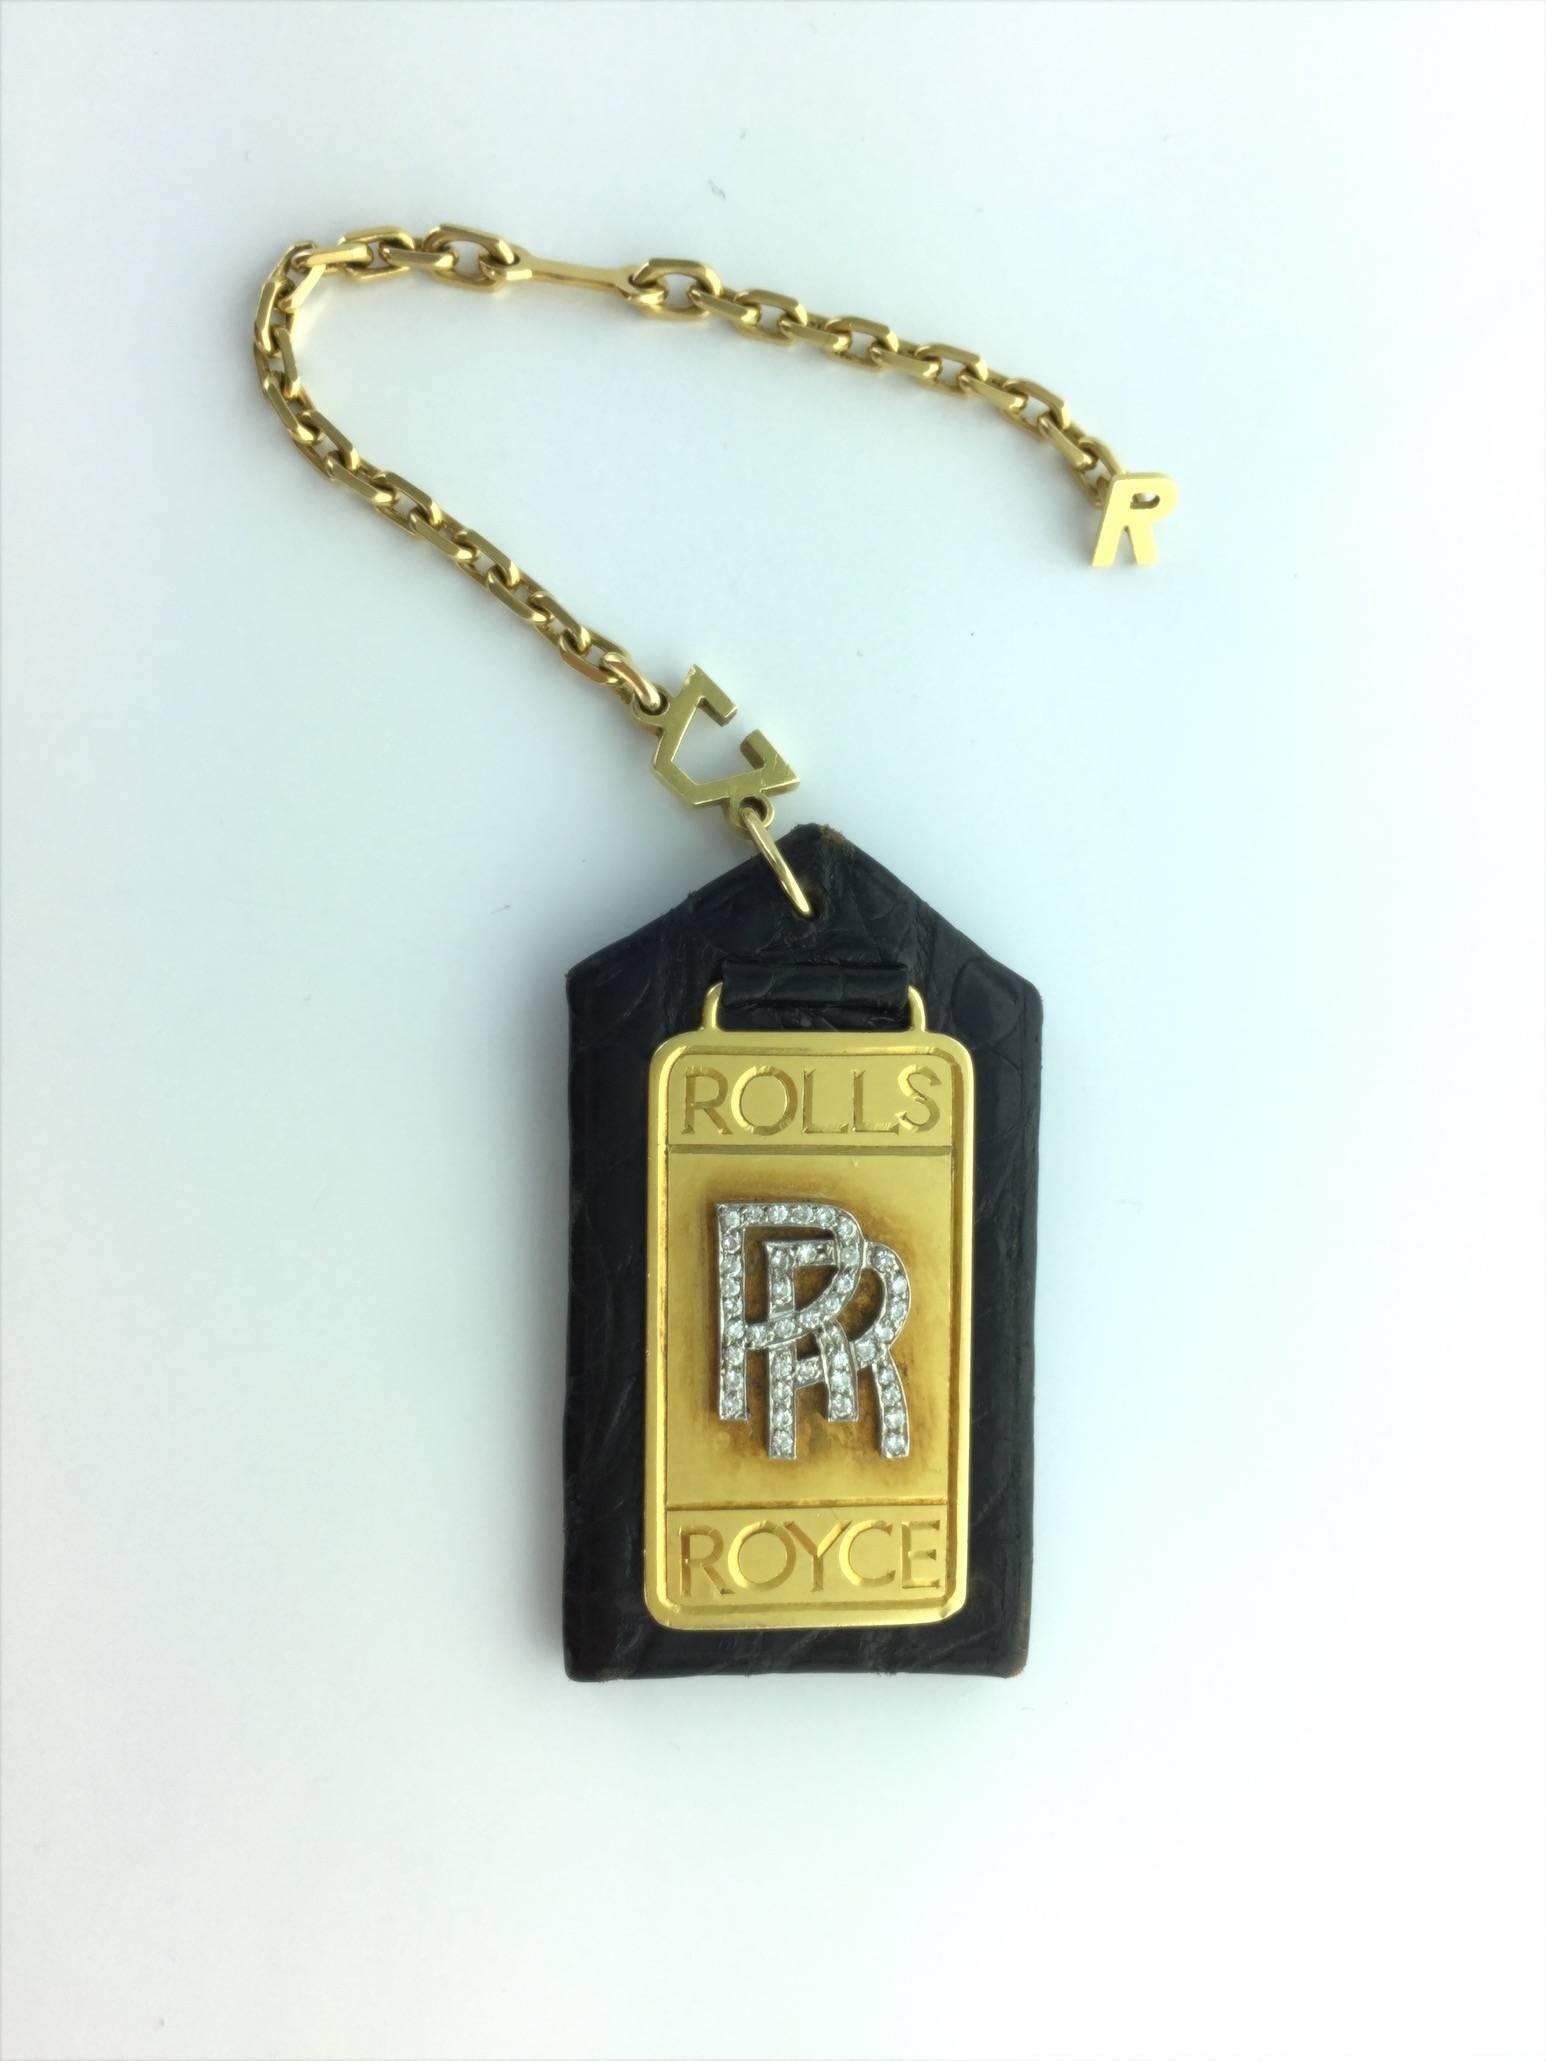 The perfect accessory for your Rolls Royce.
All yellow gold and platinum, the logo is set by diamond. 
Back in black leather.
Circa 1980.

Signed Alexandre Reza.
French assay marks and maker's mark.

Gross weight: 26.11 grams.